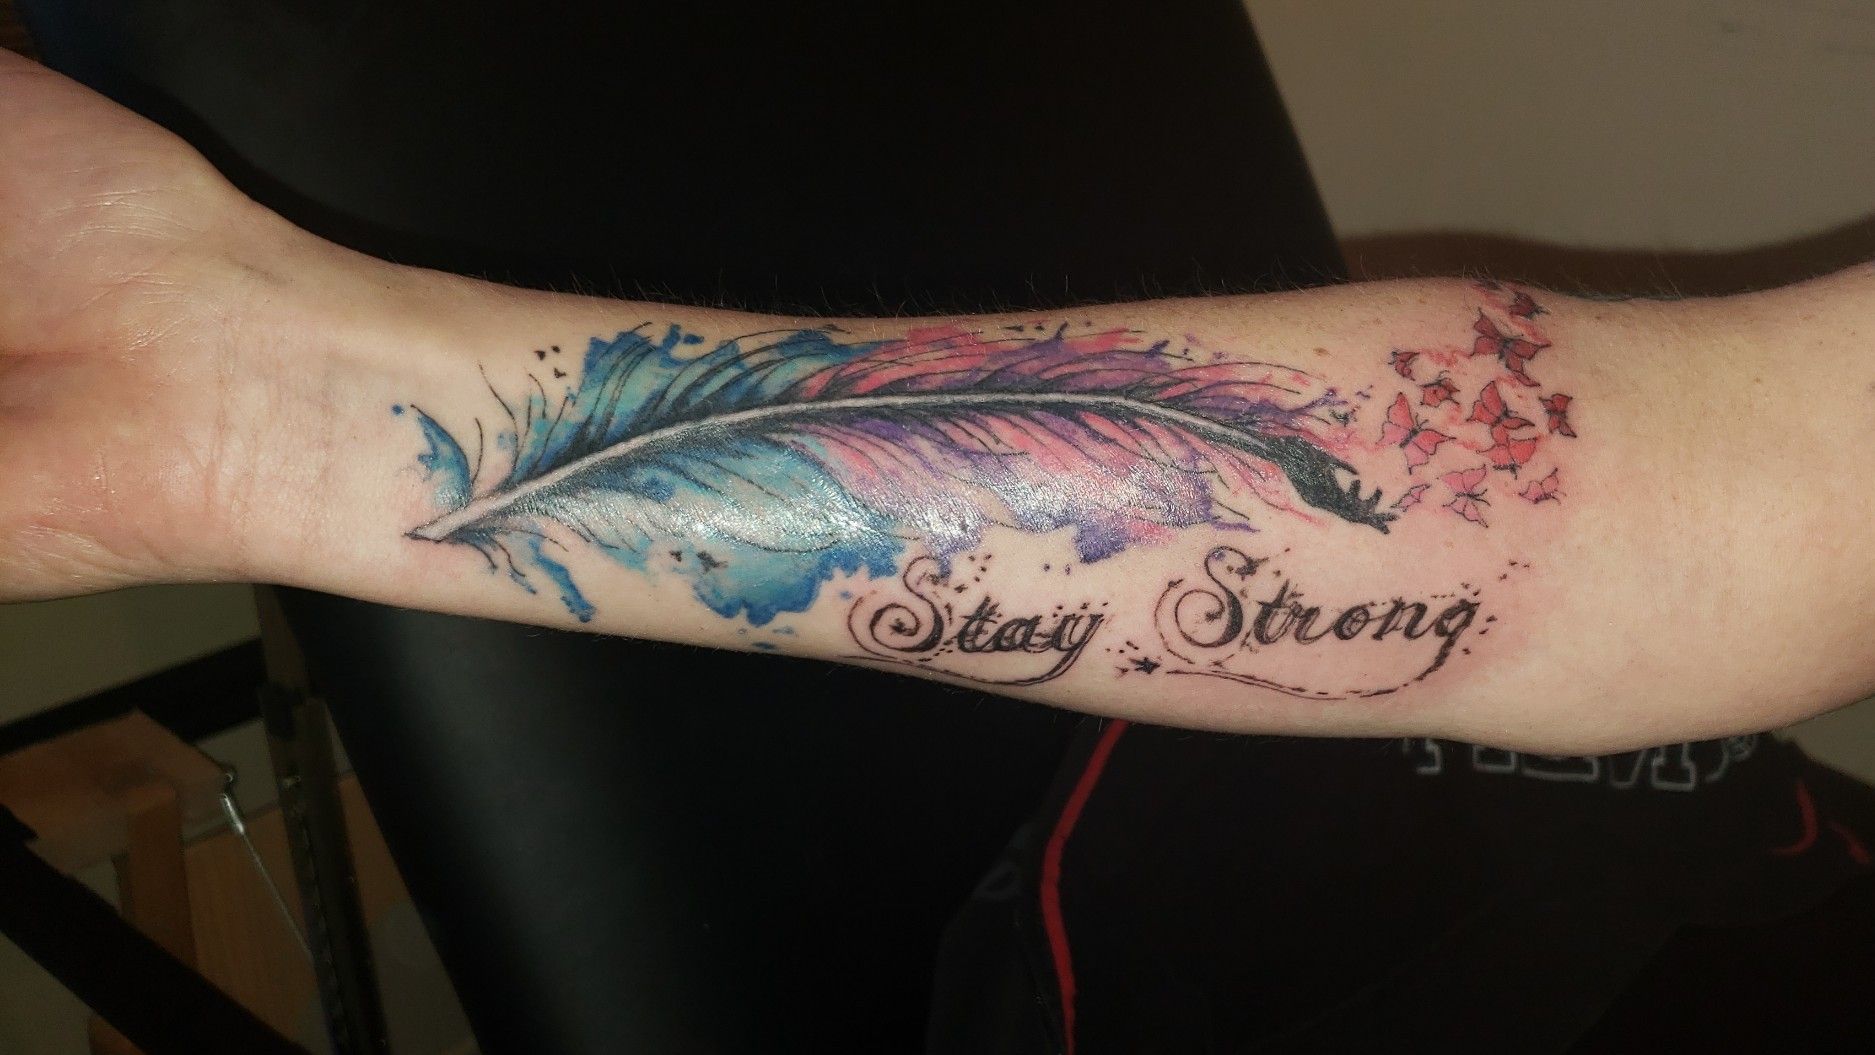 16 Alluring Stay Strong Tattoo Ideas